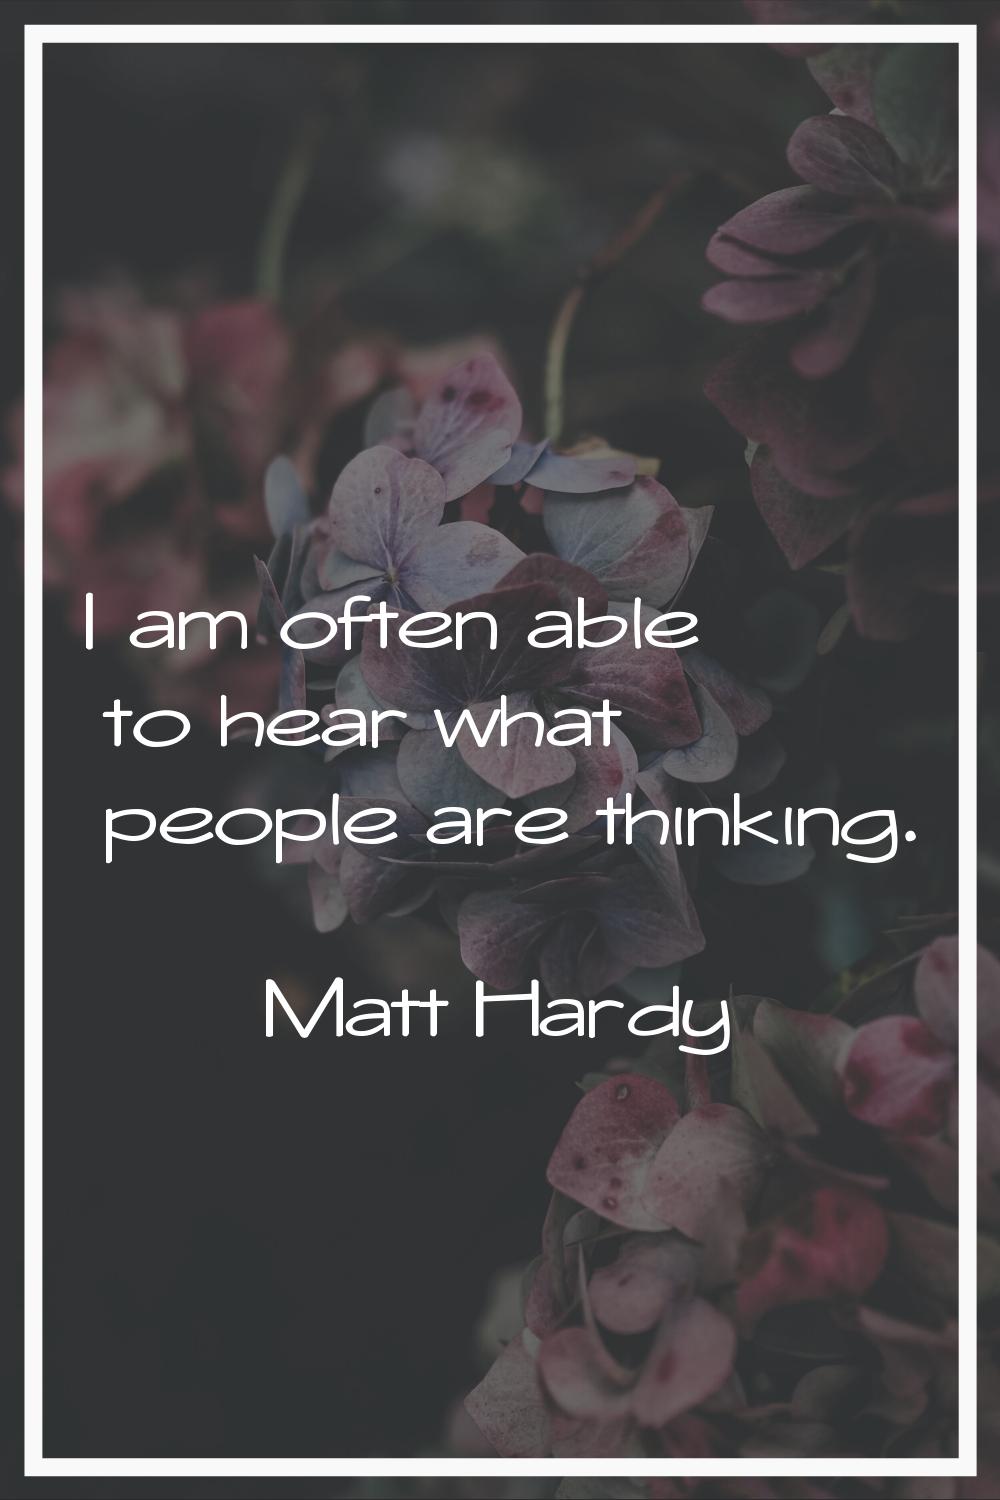 I am often able to hear what people are thinking.